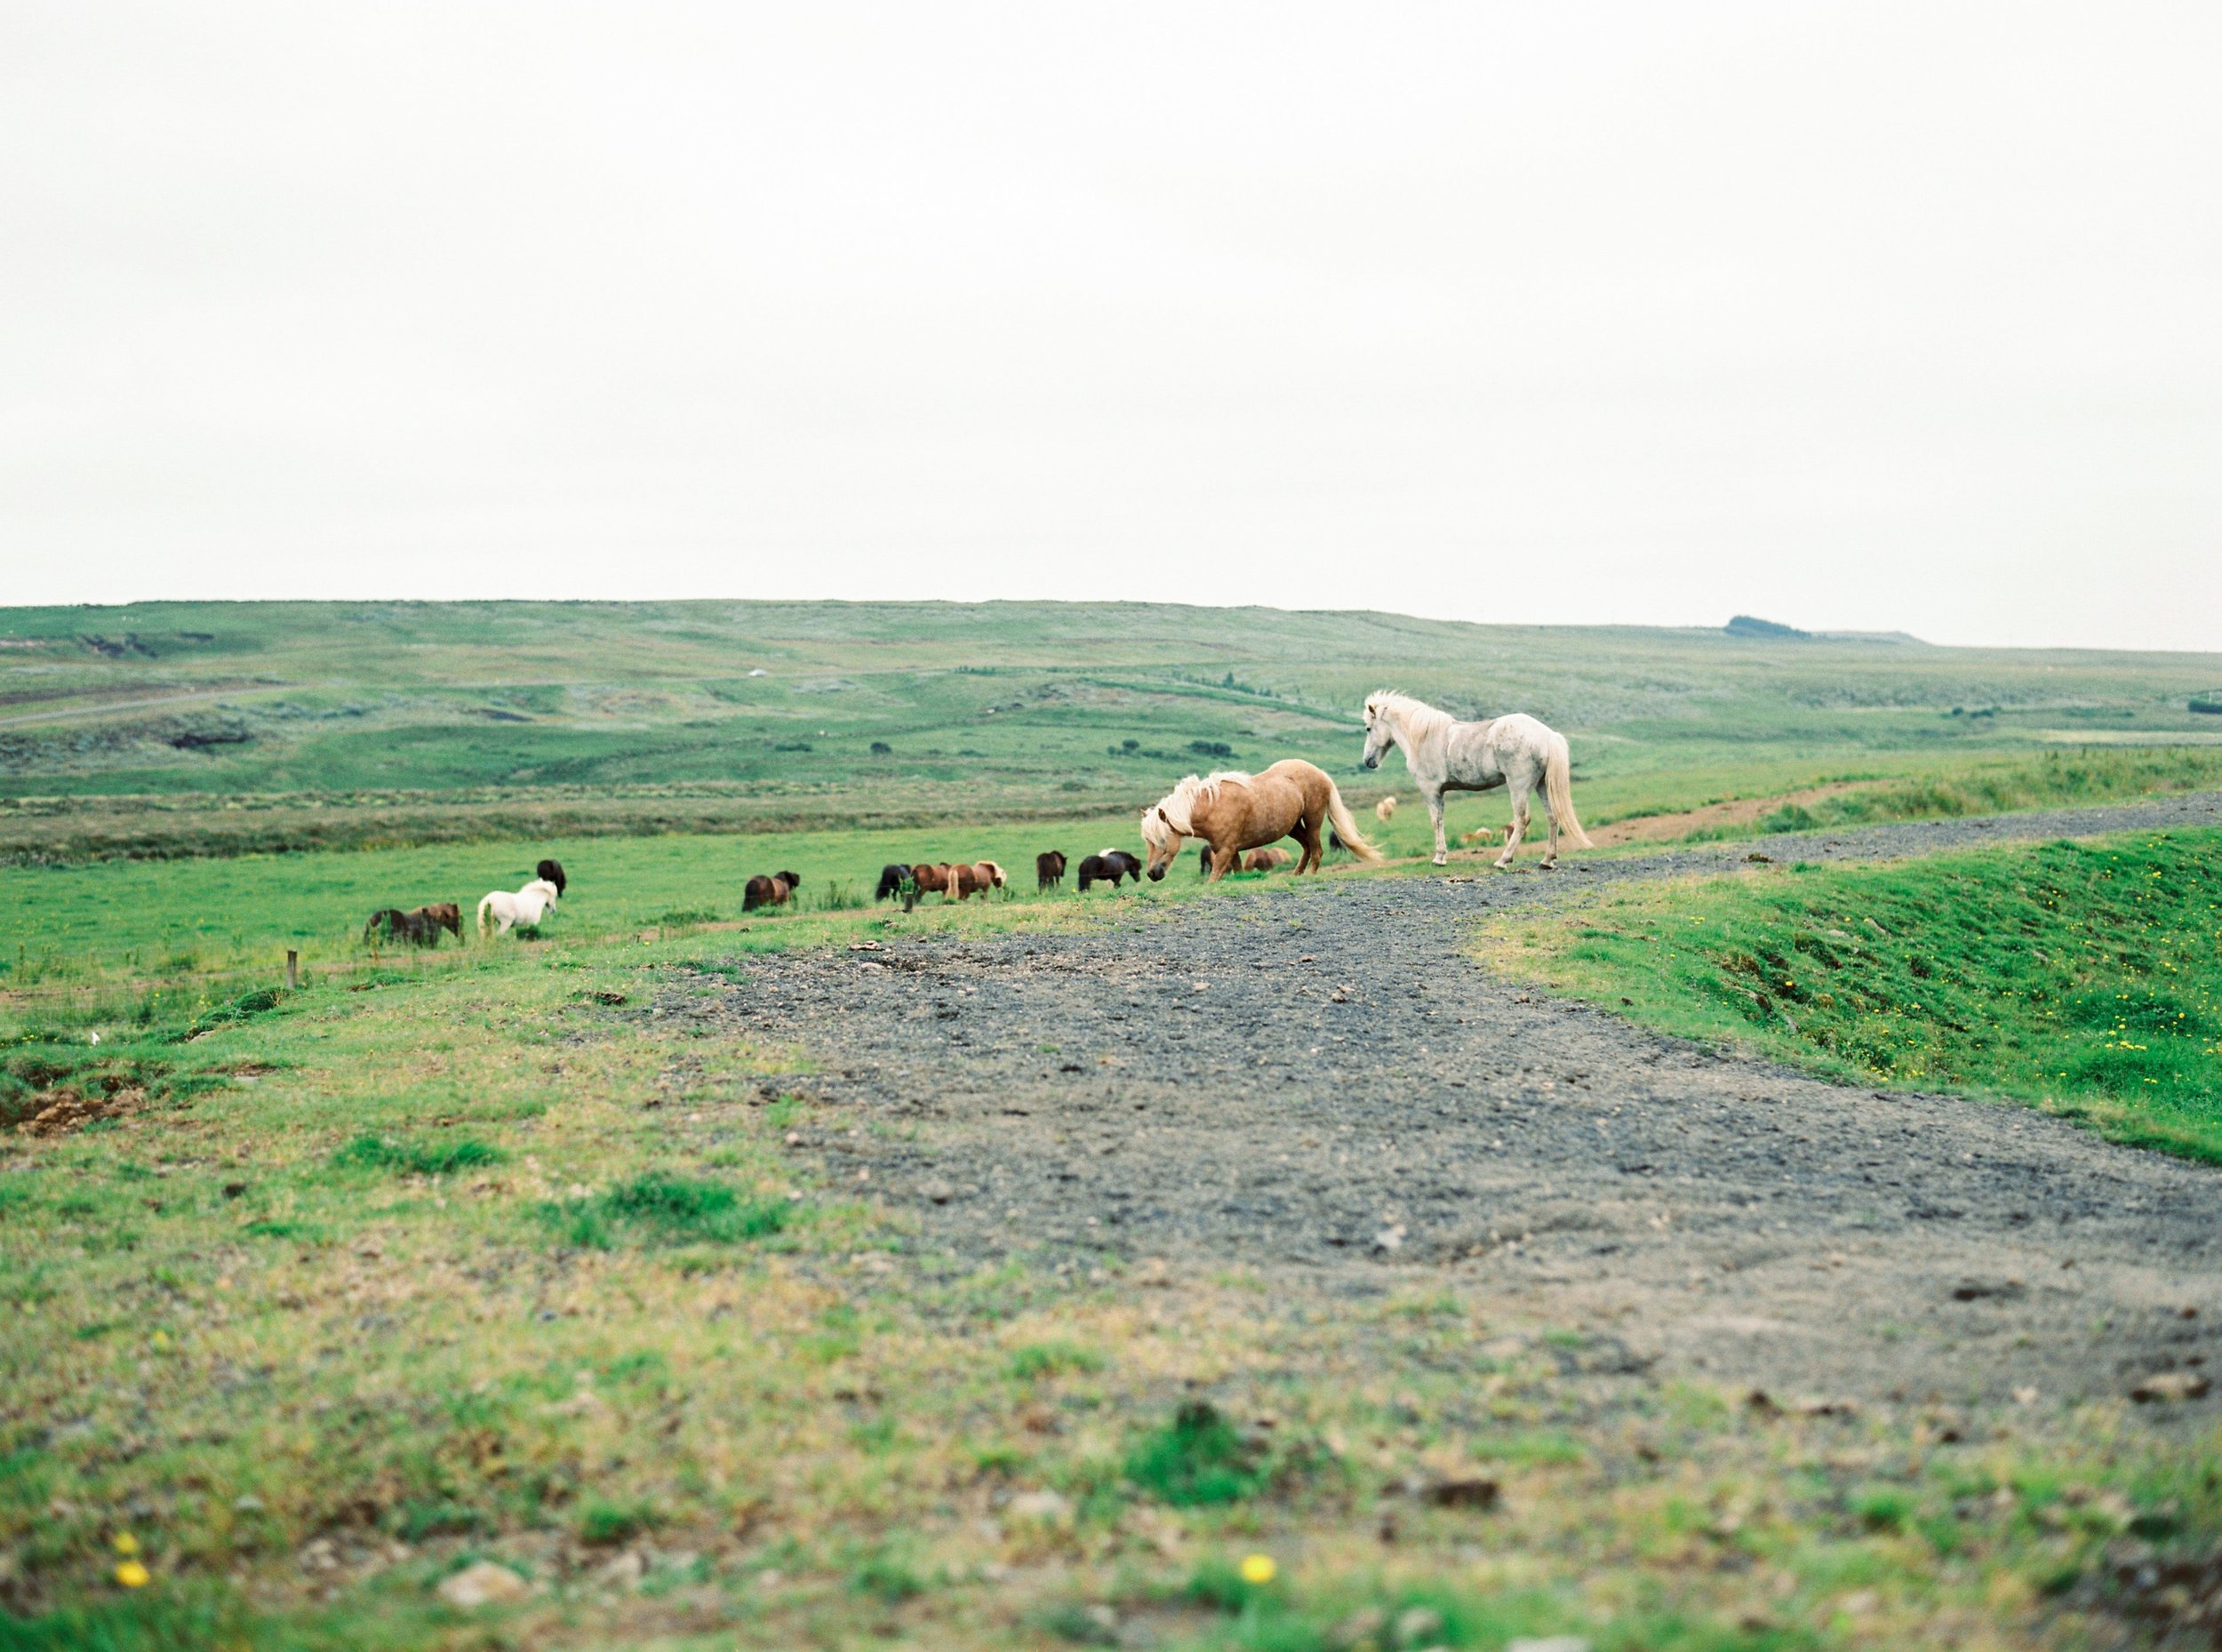 Horses in Iceland by Kristin Sweeting now on Cottage Hill50.jpg